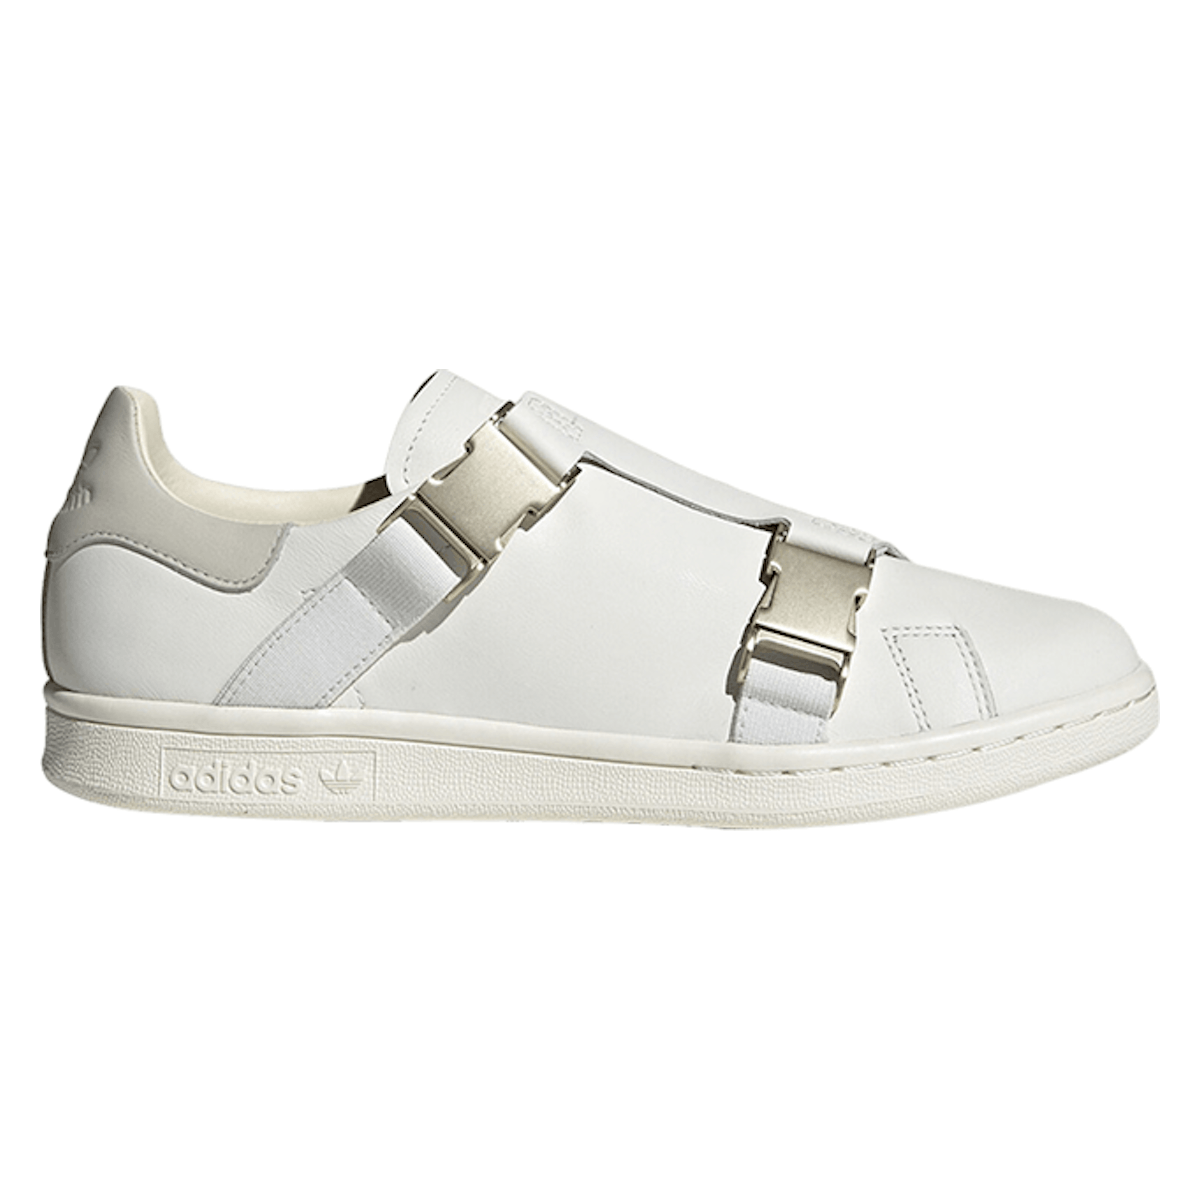 Adidas Stan Smith Buckle "Off White"